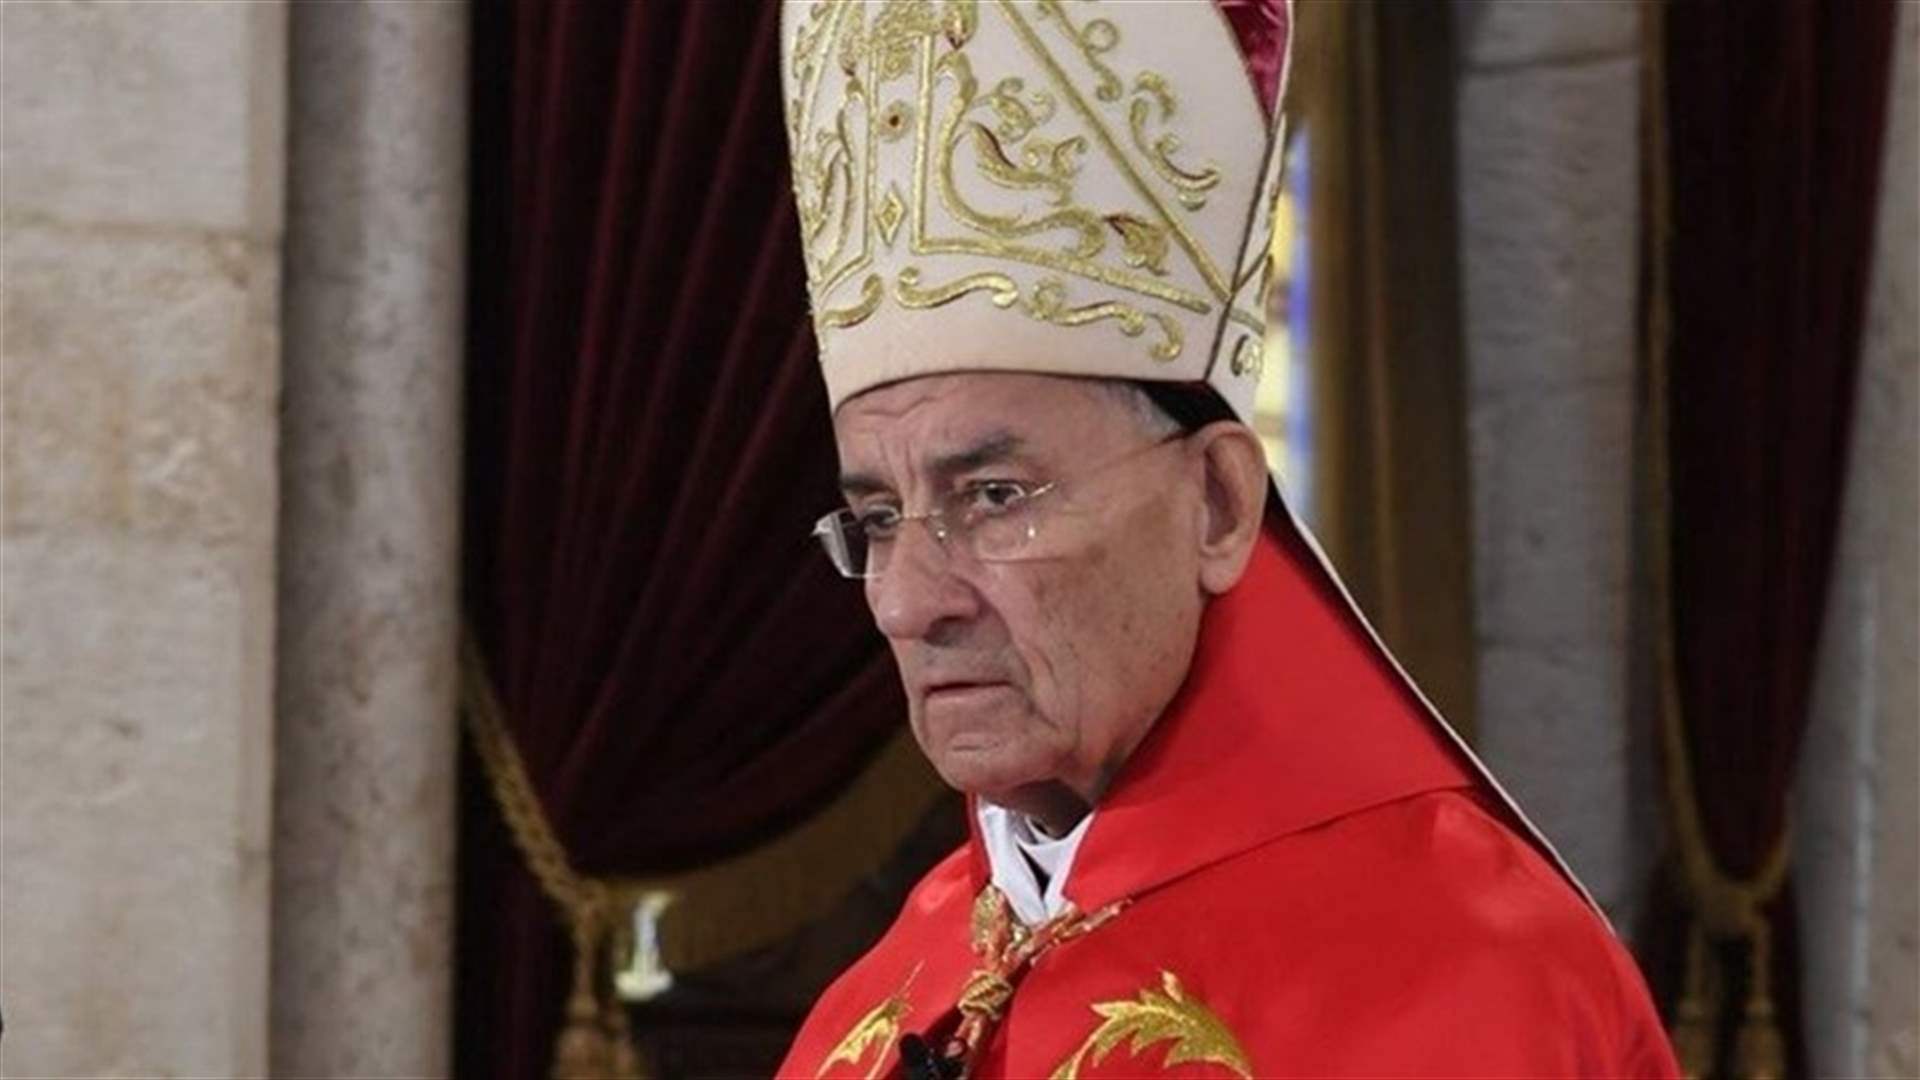 Resolution 1701 advocacy: Maronite Patriarch&#39;s appeal for border towns&#39; protection